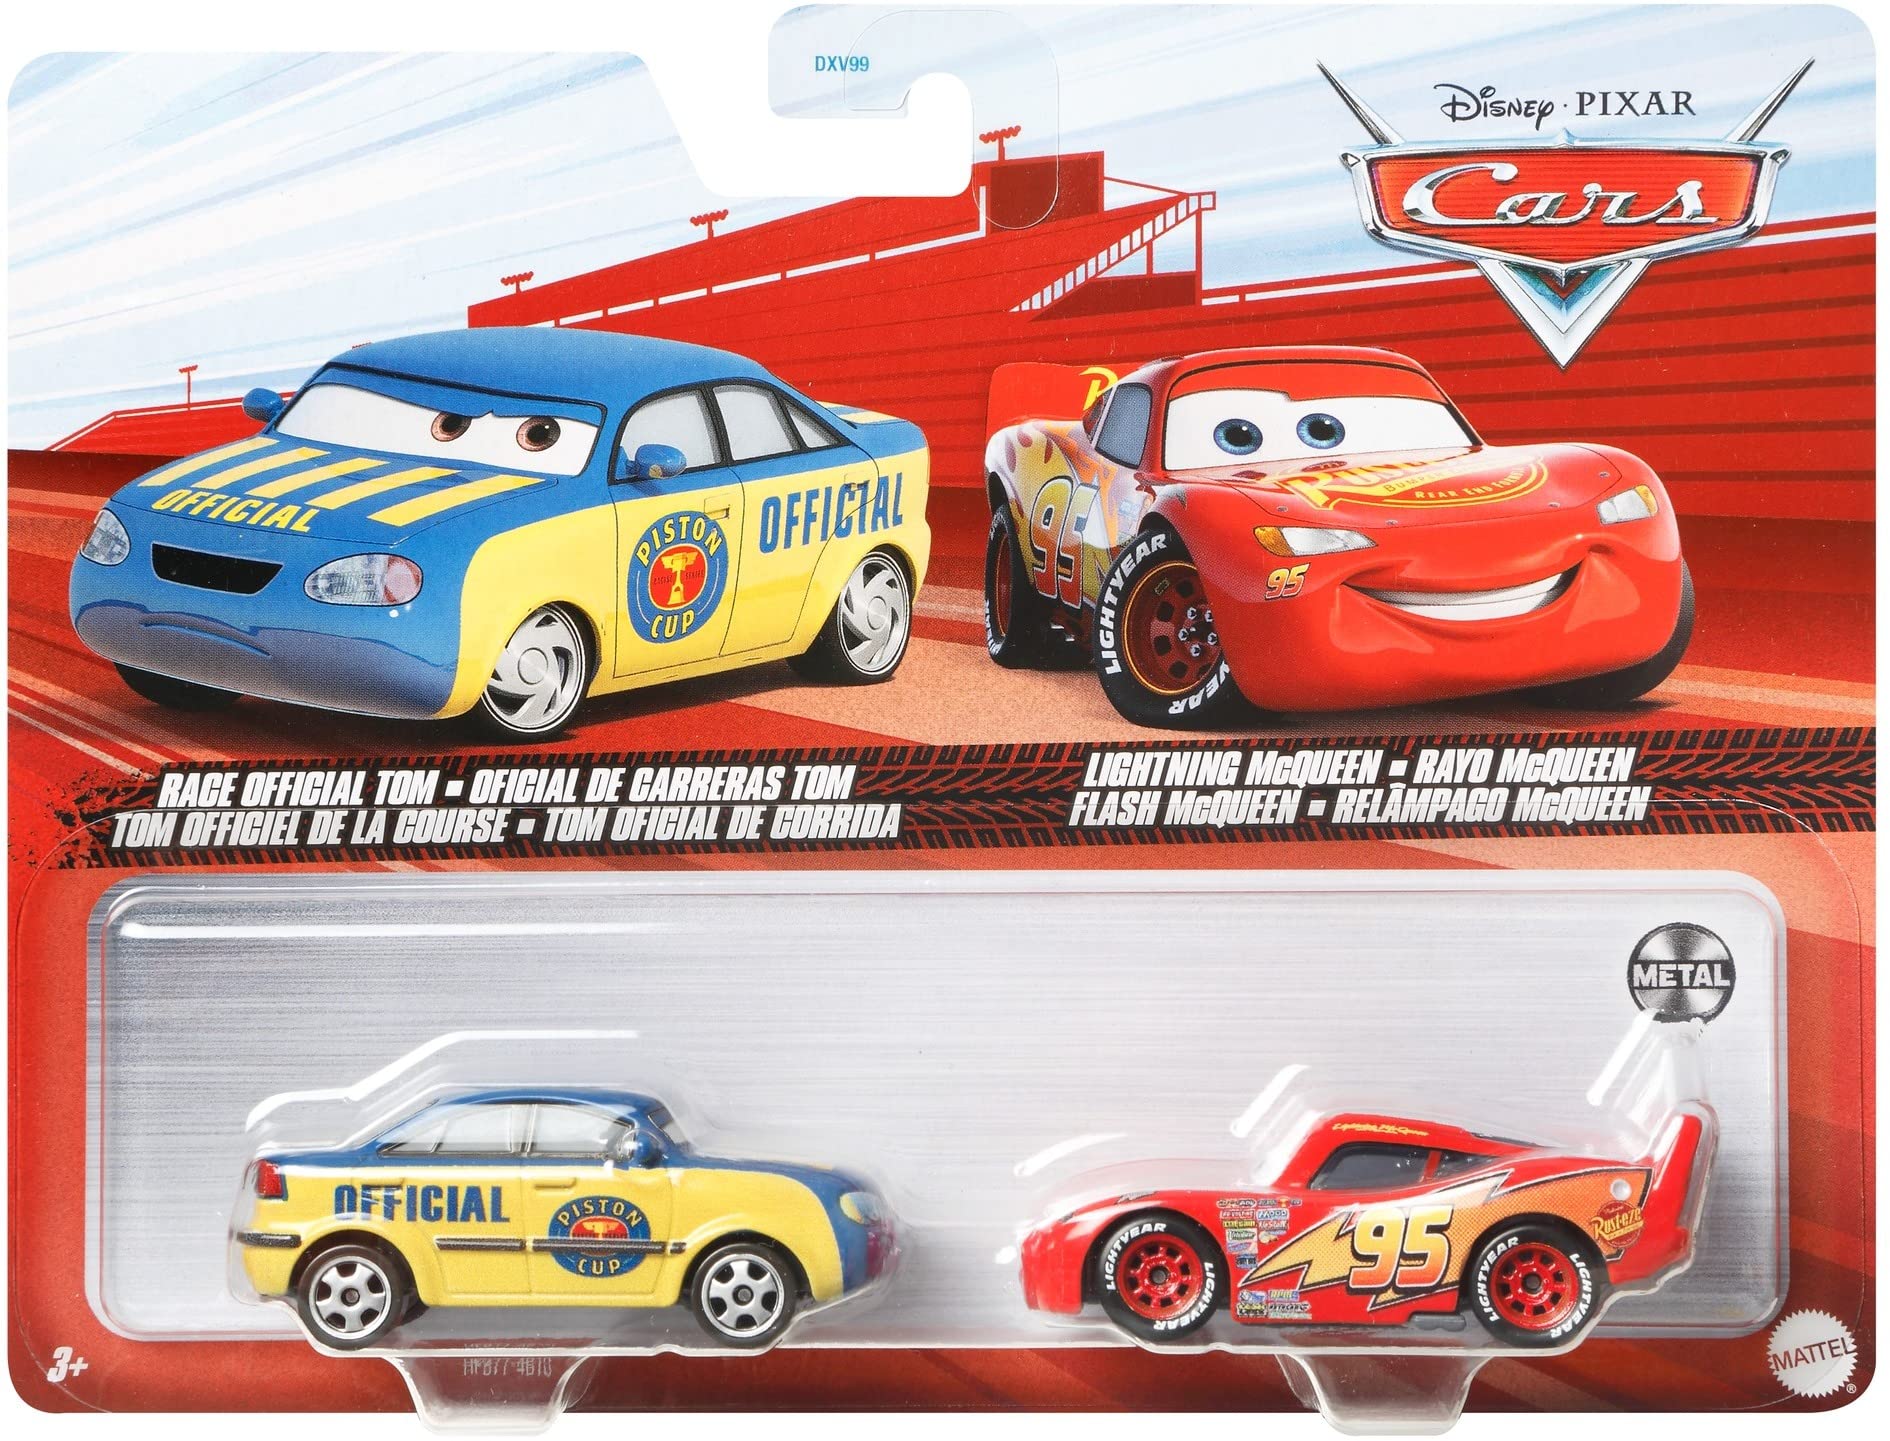  Disney Cars Toys and Pixar Cars 3, Mater & Lightning McQueen  2-Pack, 1:55 Scale Die-Cast Fan Favorite Character Vehicles for Racing and  Storytelling Fun, Gift for Kids Age 3 and Older